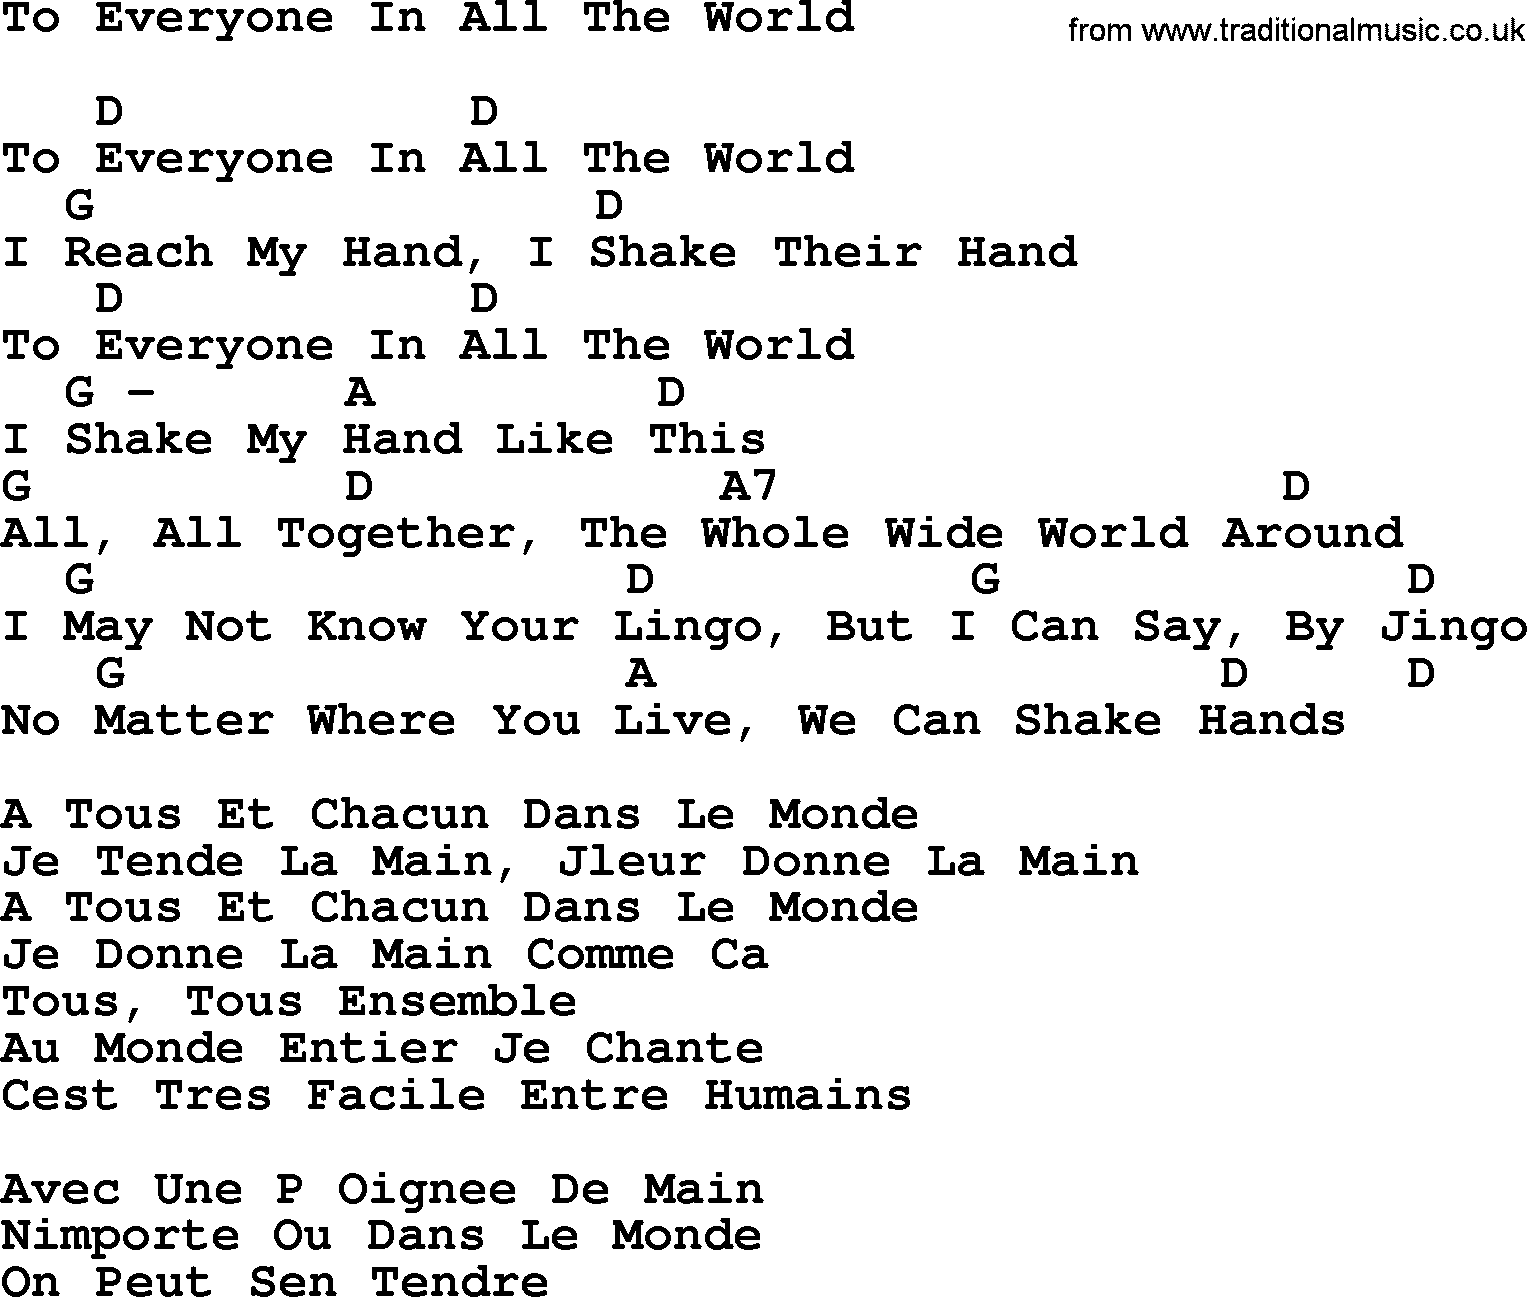 Pete Seeger song To Everyone In All The World, lyrics and chords